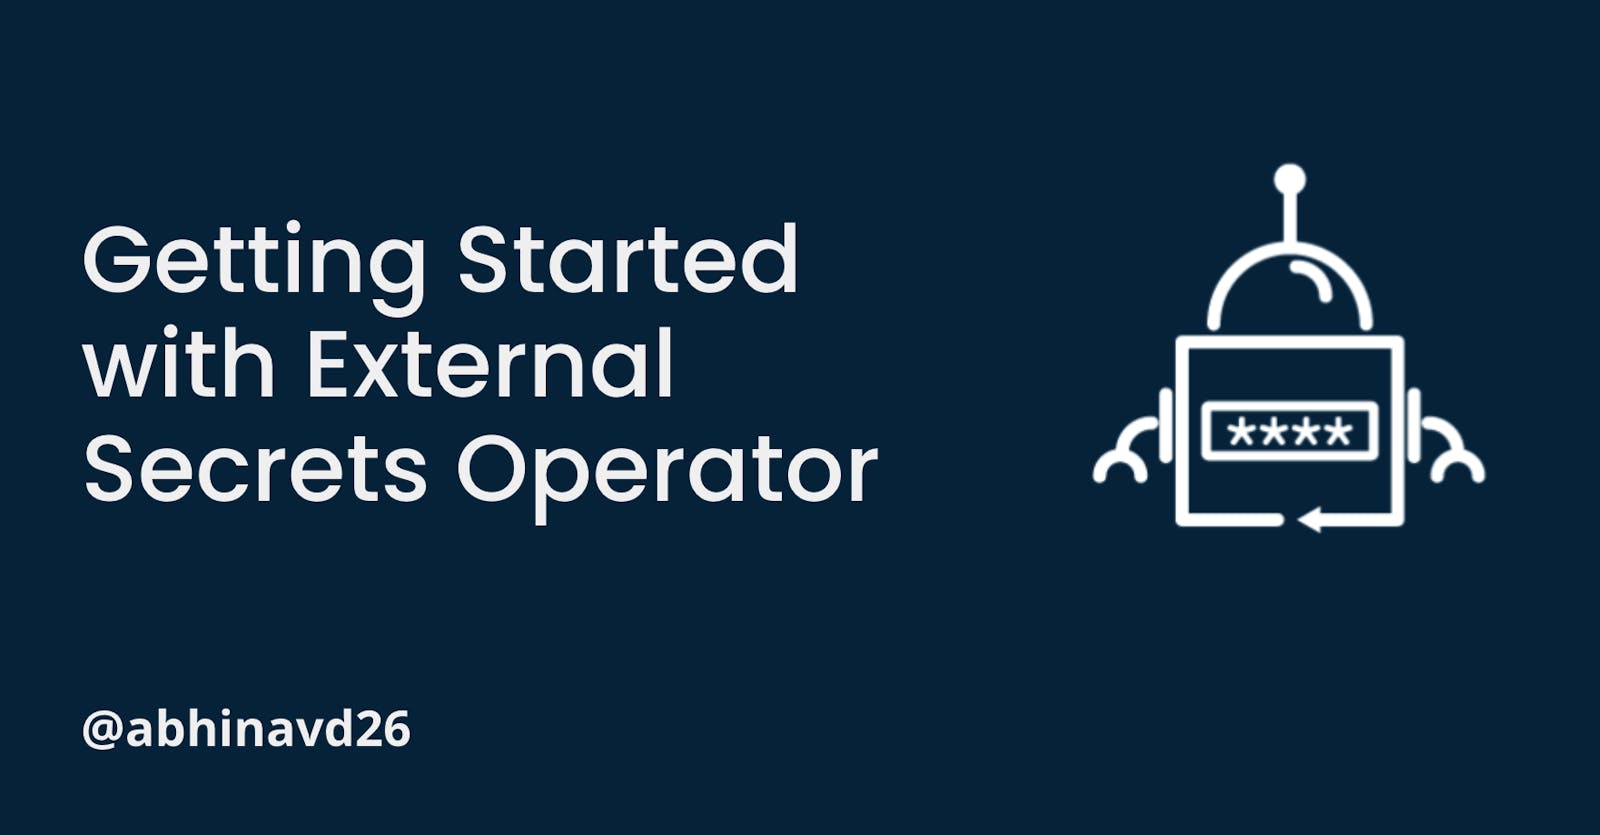 Getting Started with External Secrets Operator